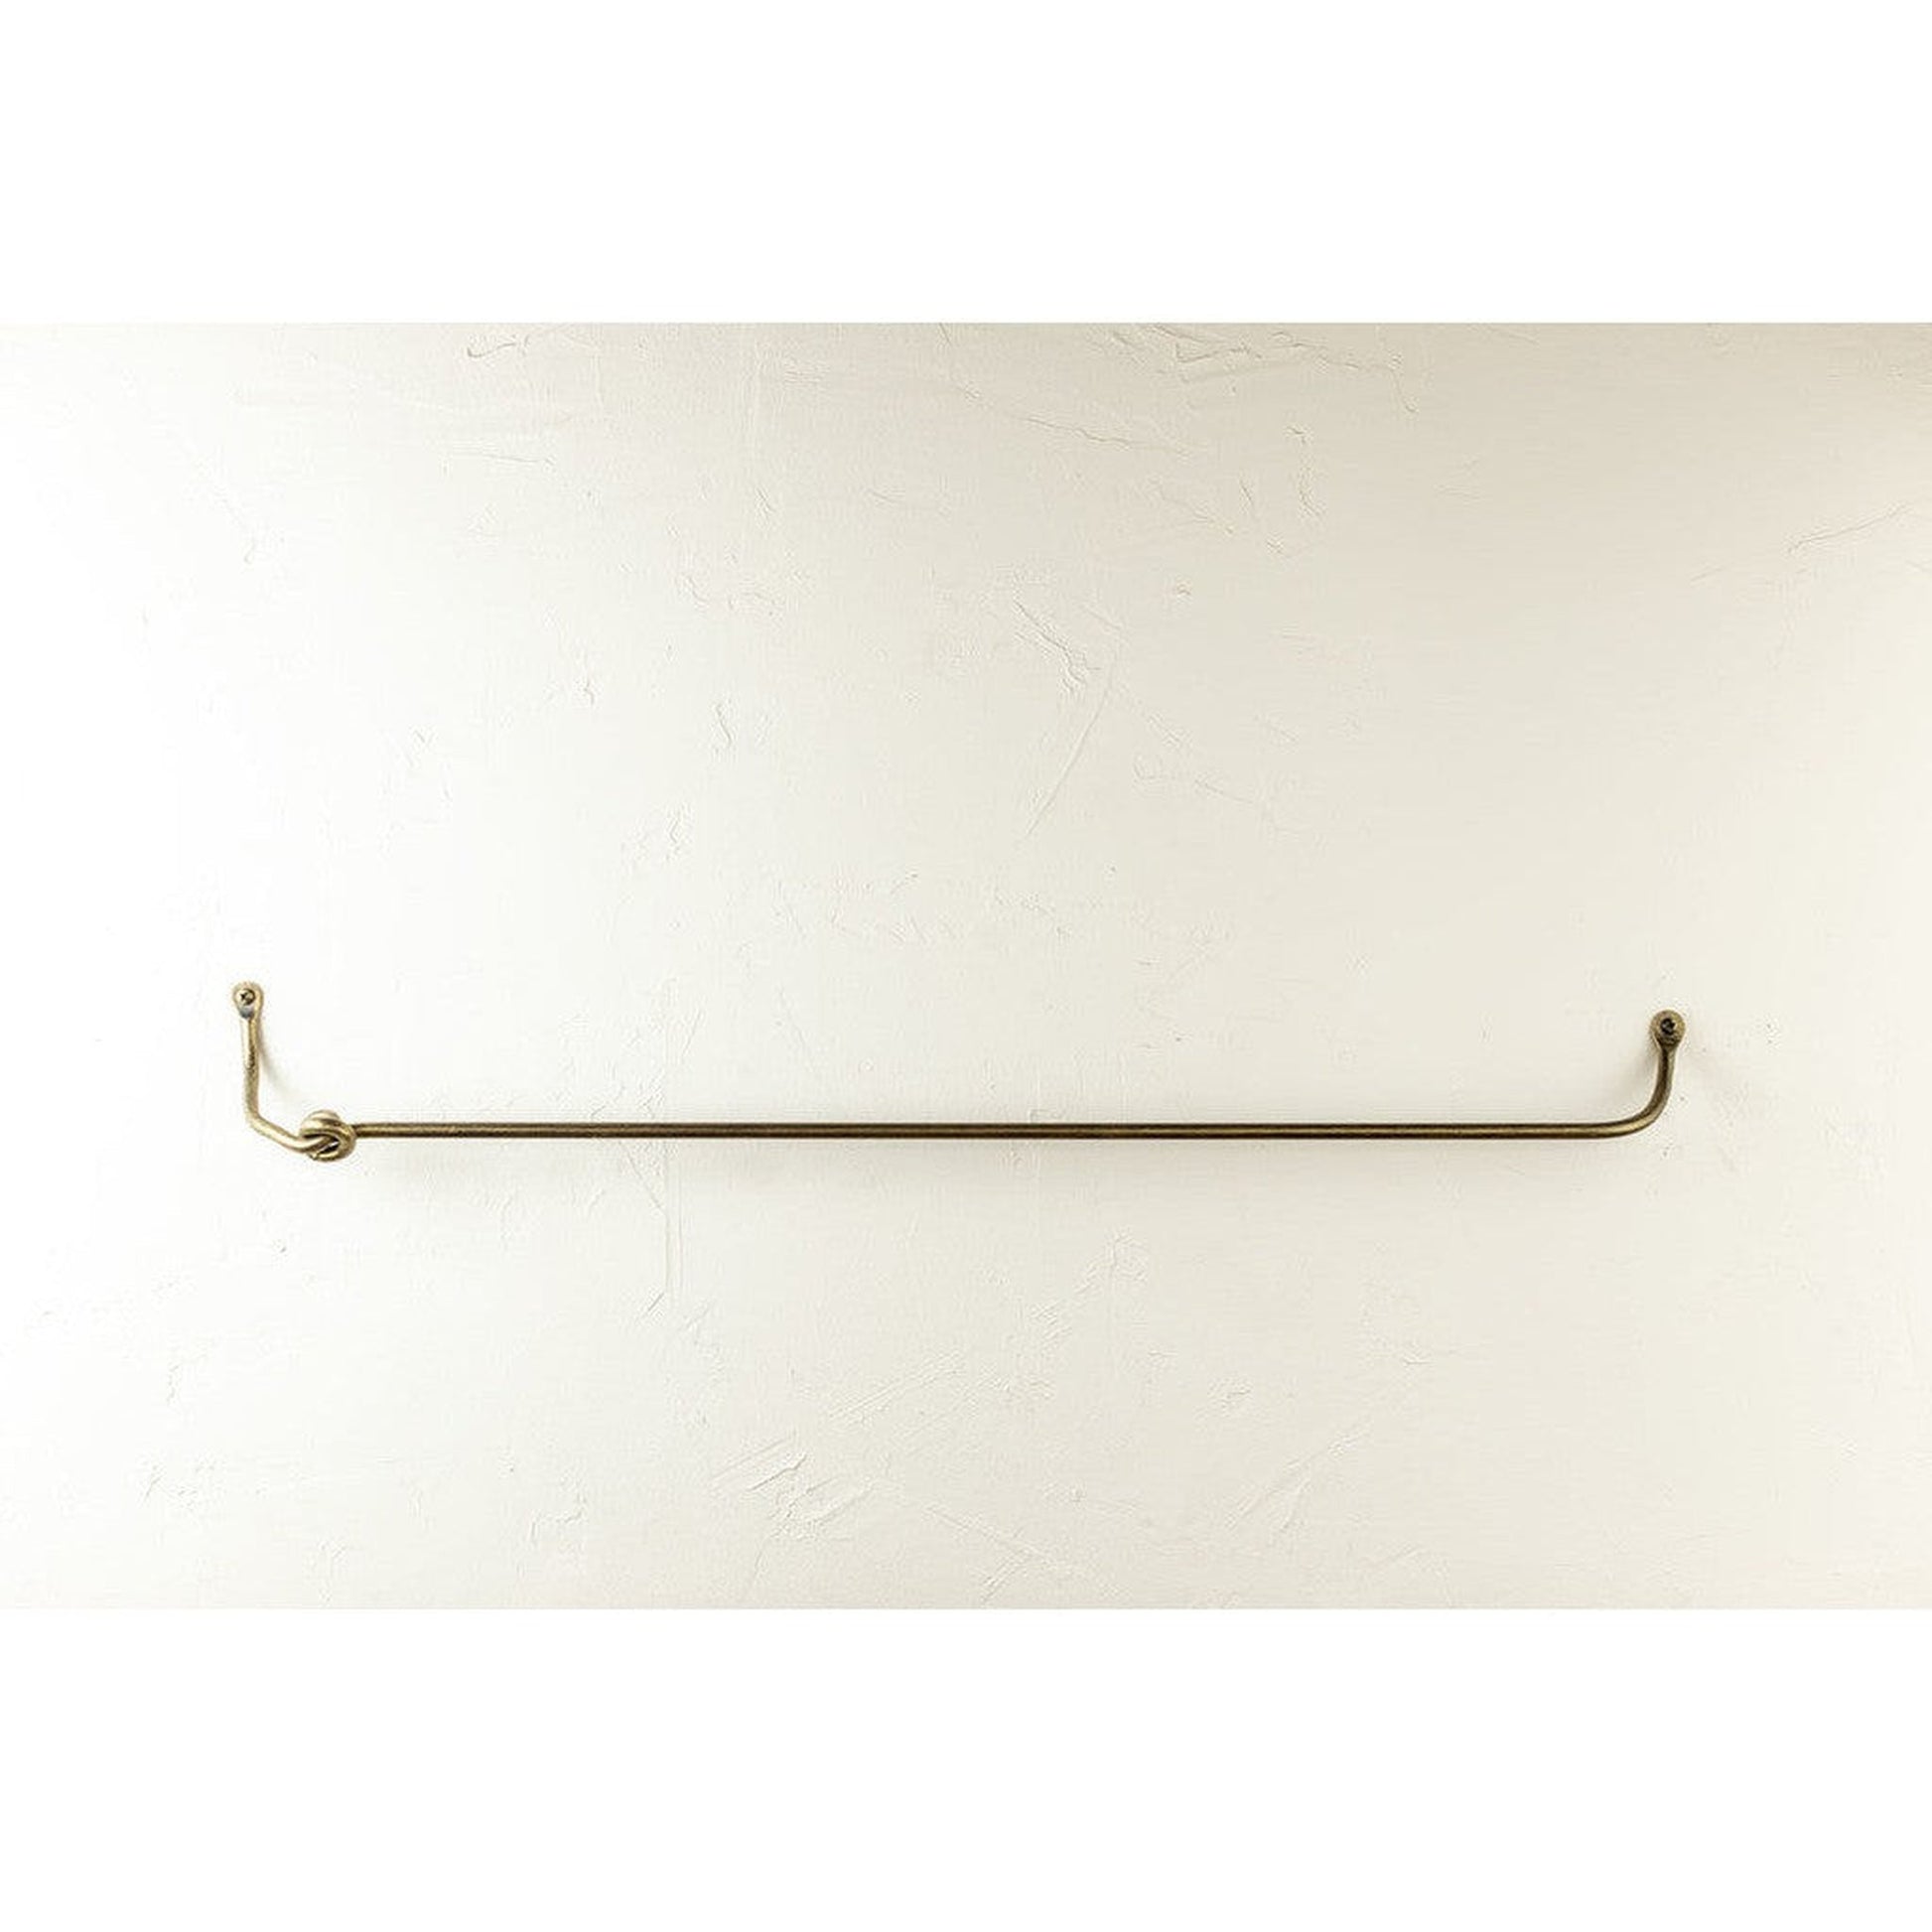 Stone County Ironworks Knot 32" Chalk White Iron Towel Bar With Copper Iron Accent